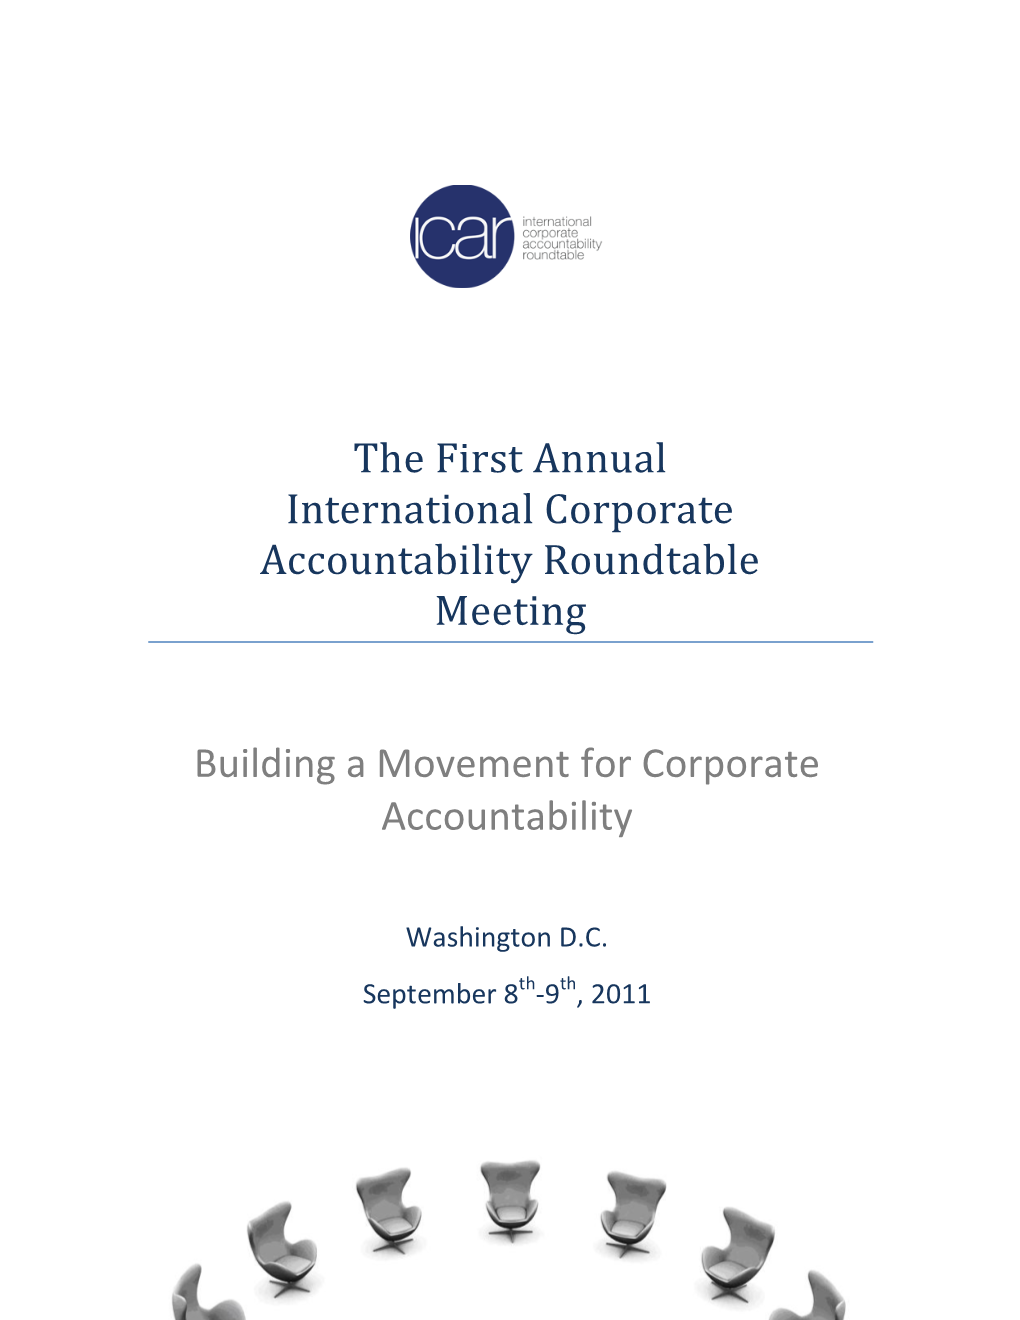 Building a Movement for Corporate Accountability